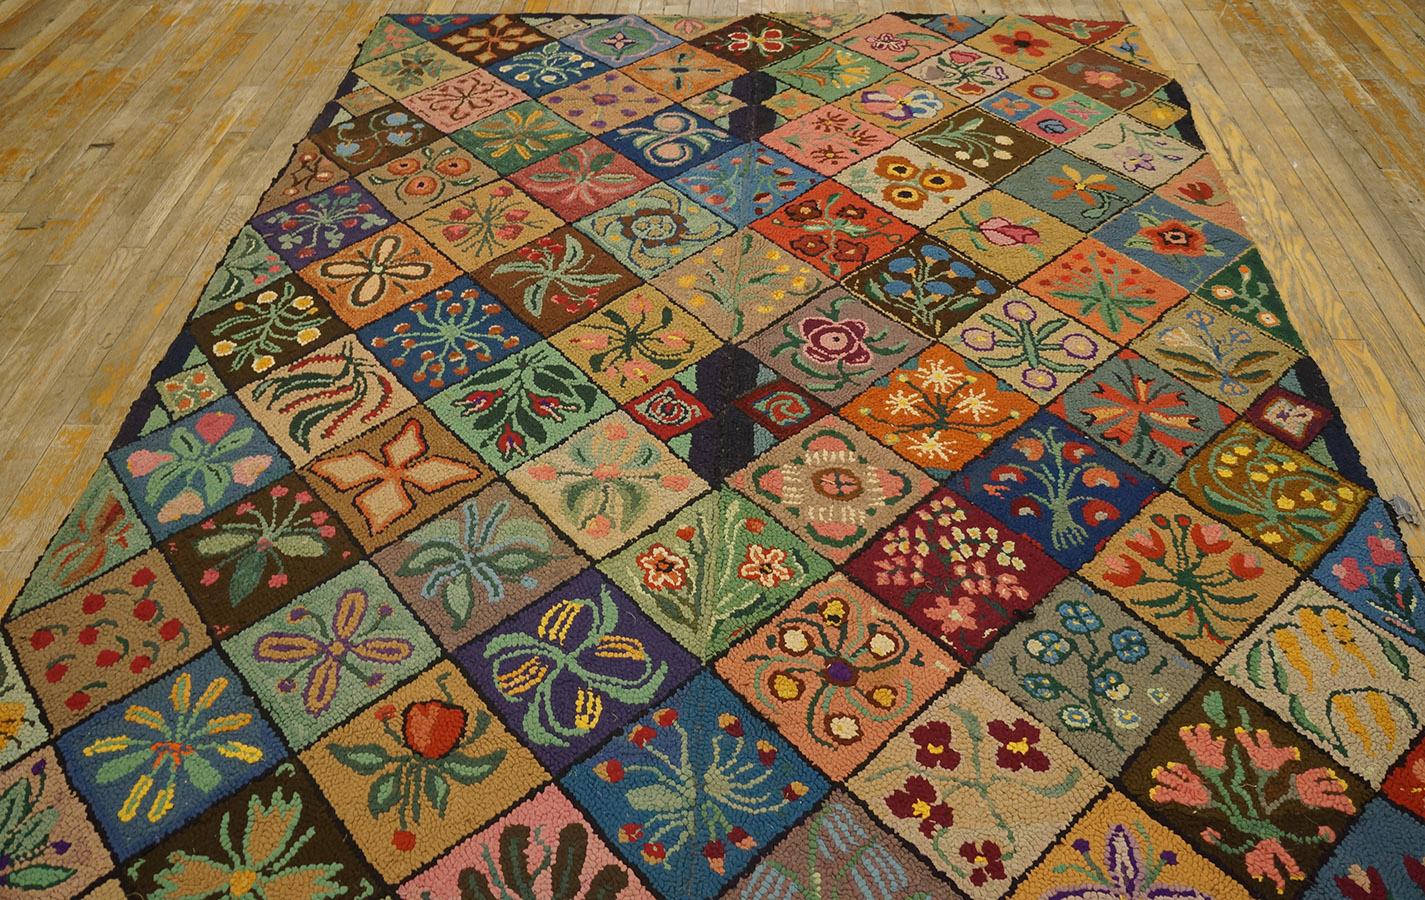 Late 19th Century 1930s American Hooked Rug ( 6' x 8'9